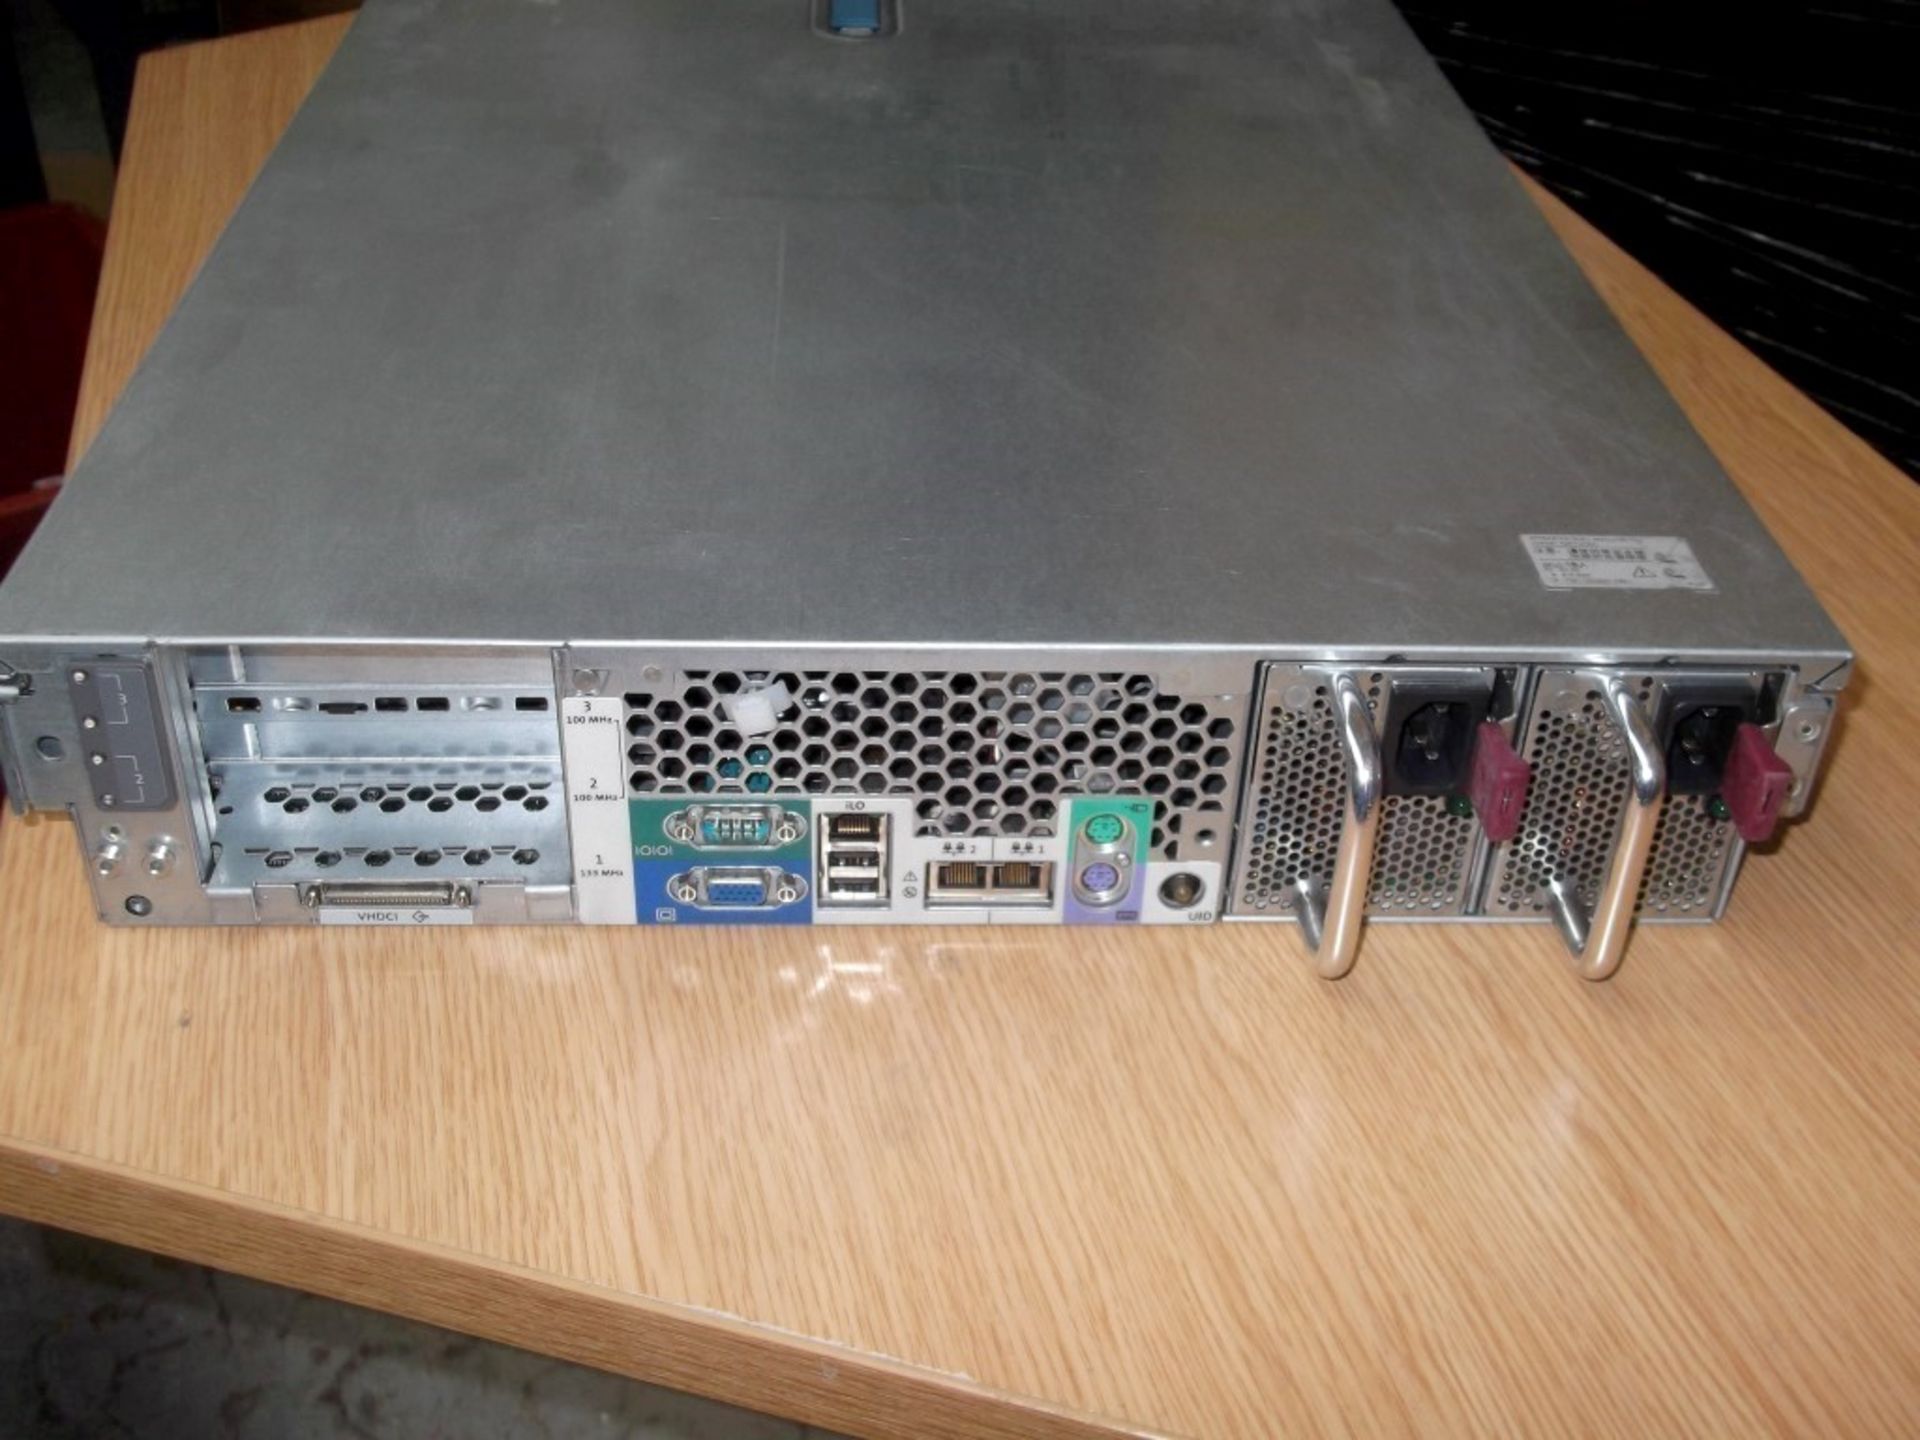 1 x 1 x HP ProLiant DL380 Rackmount File Server - G3 Xeon - 2GB - Recently Removed From A Working - Image 4 of 5